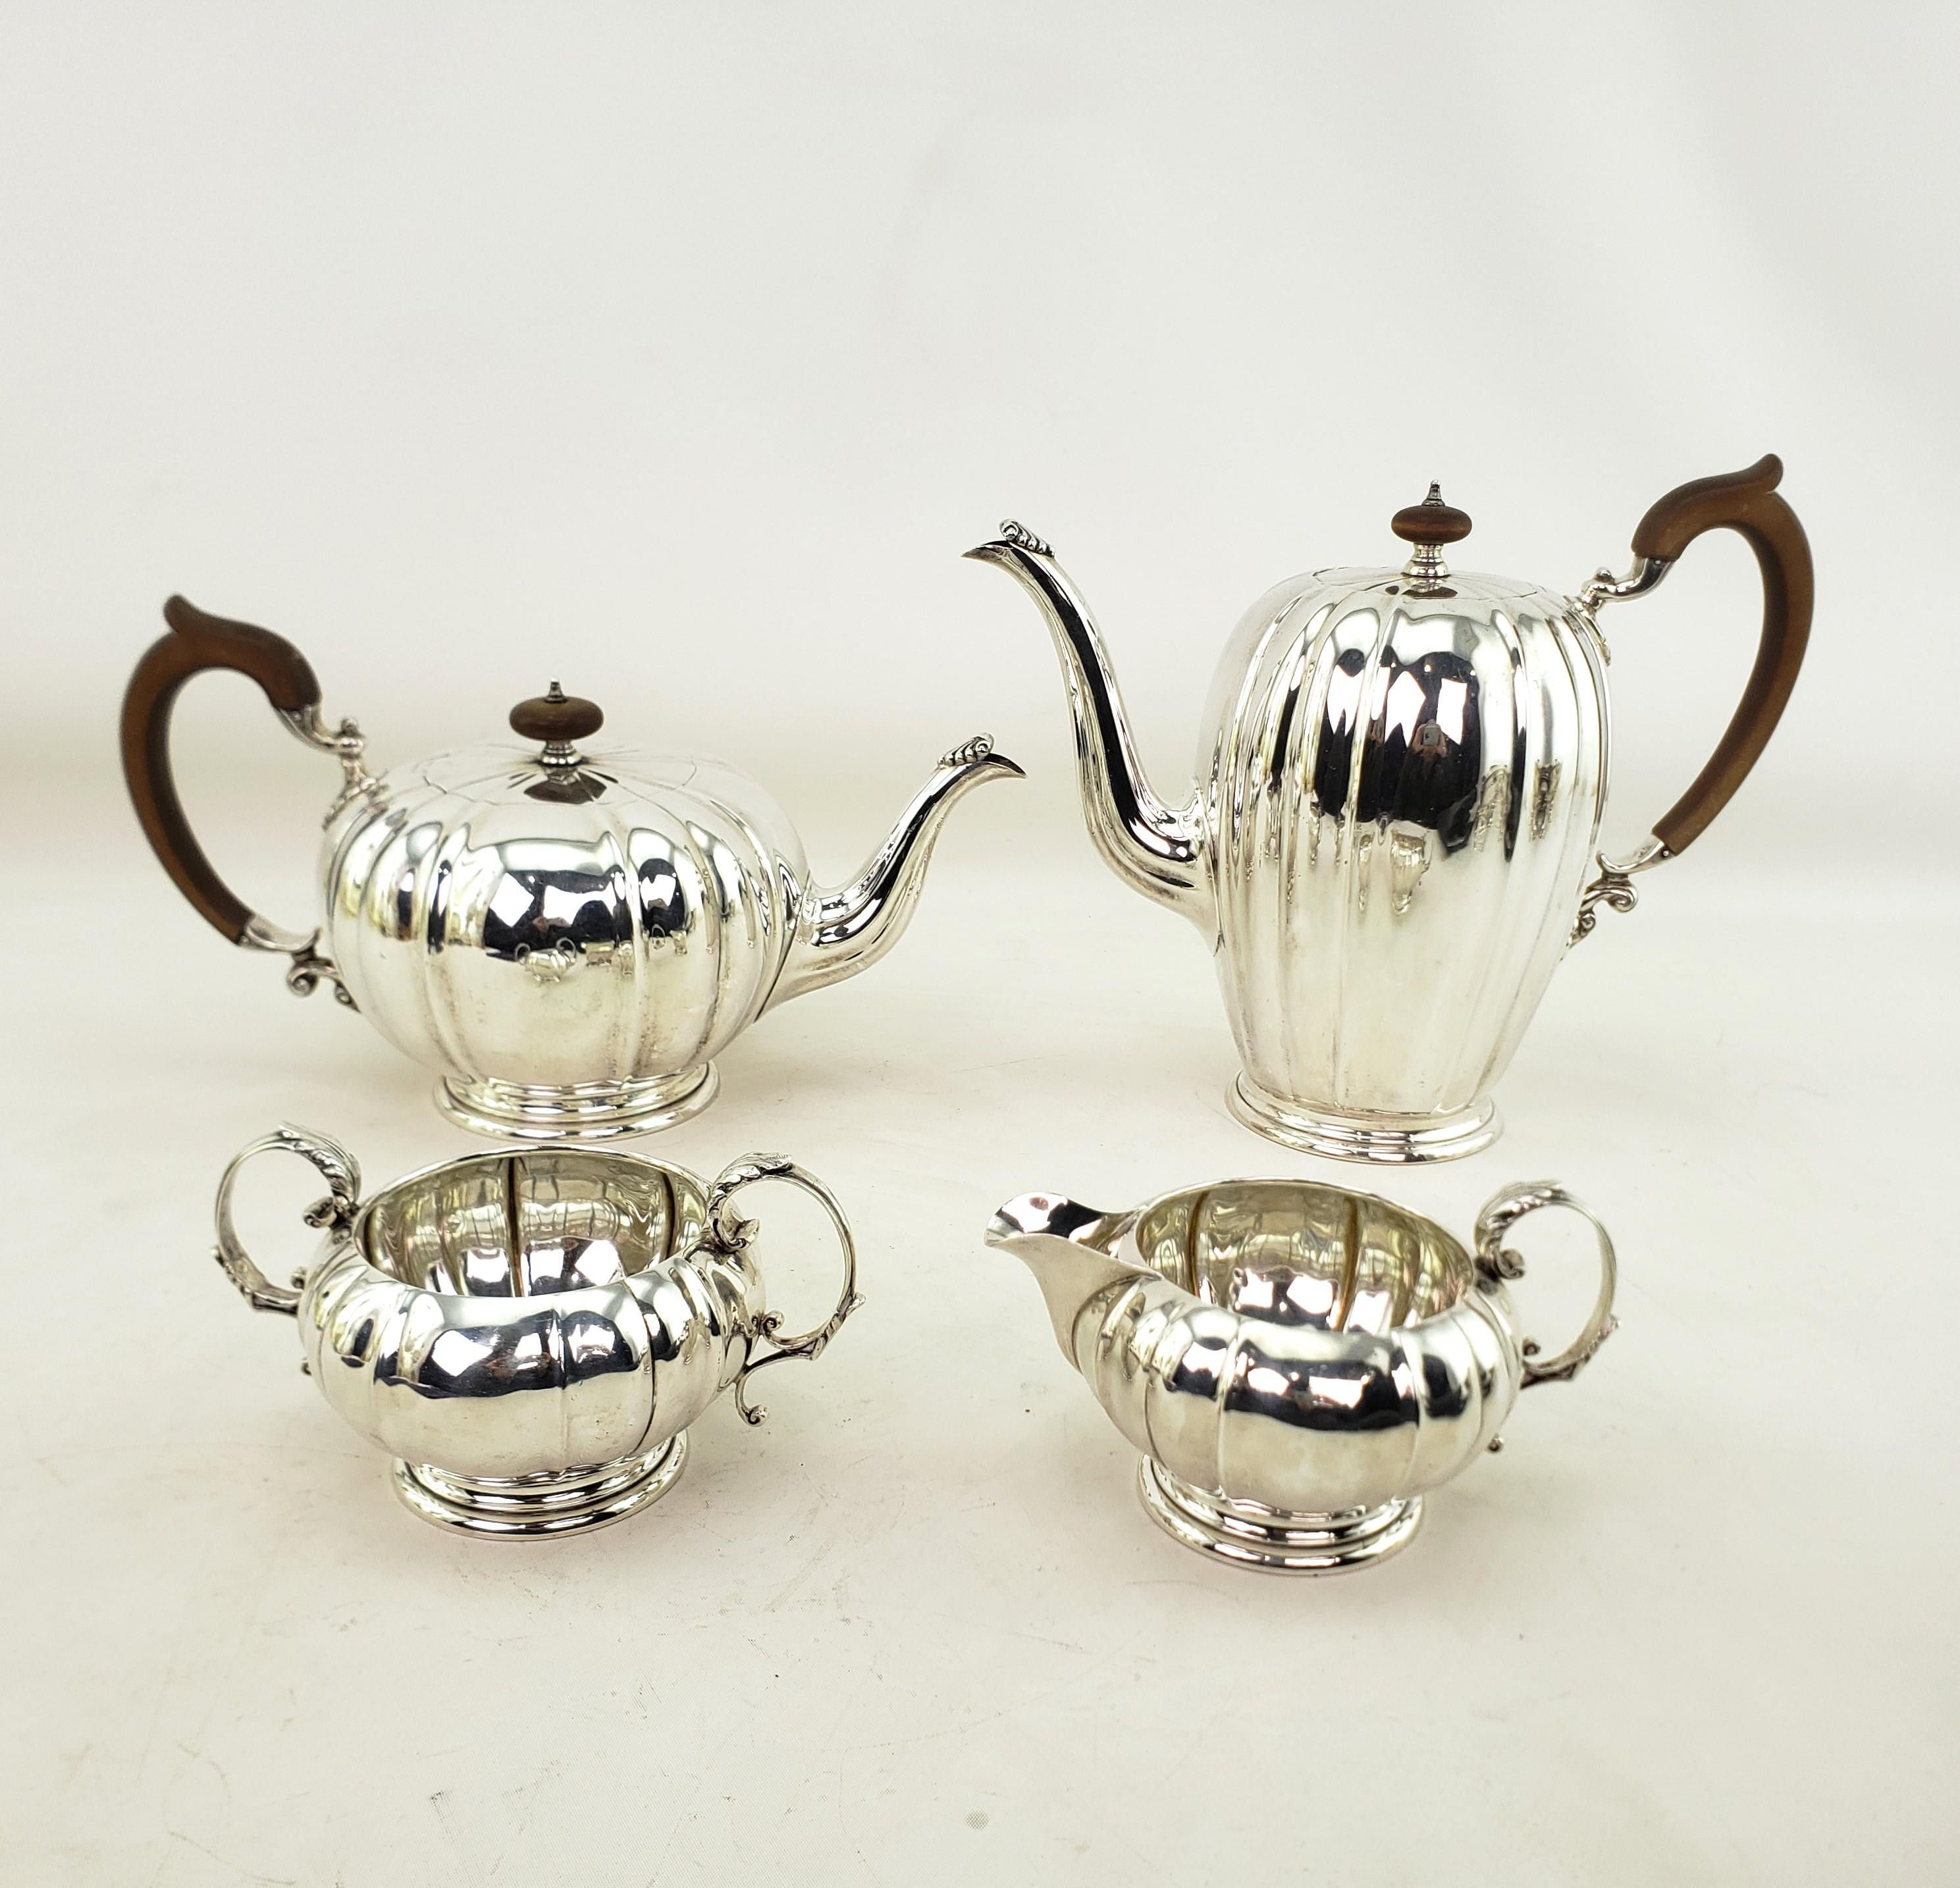 Tgus antique tea or coffee set was made by the renowned Henry Birks of Canada and dates to approximately 1920 and done in a Georgian style. This four piece set is composed of sterling silver with furrowed sides and stylized leaf accents. The coffee